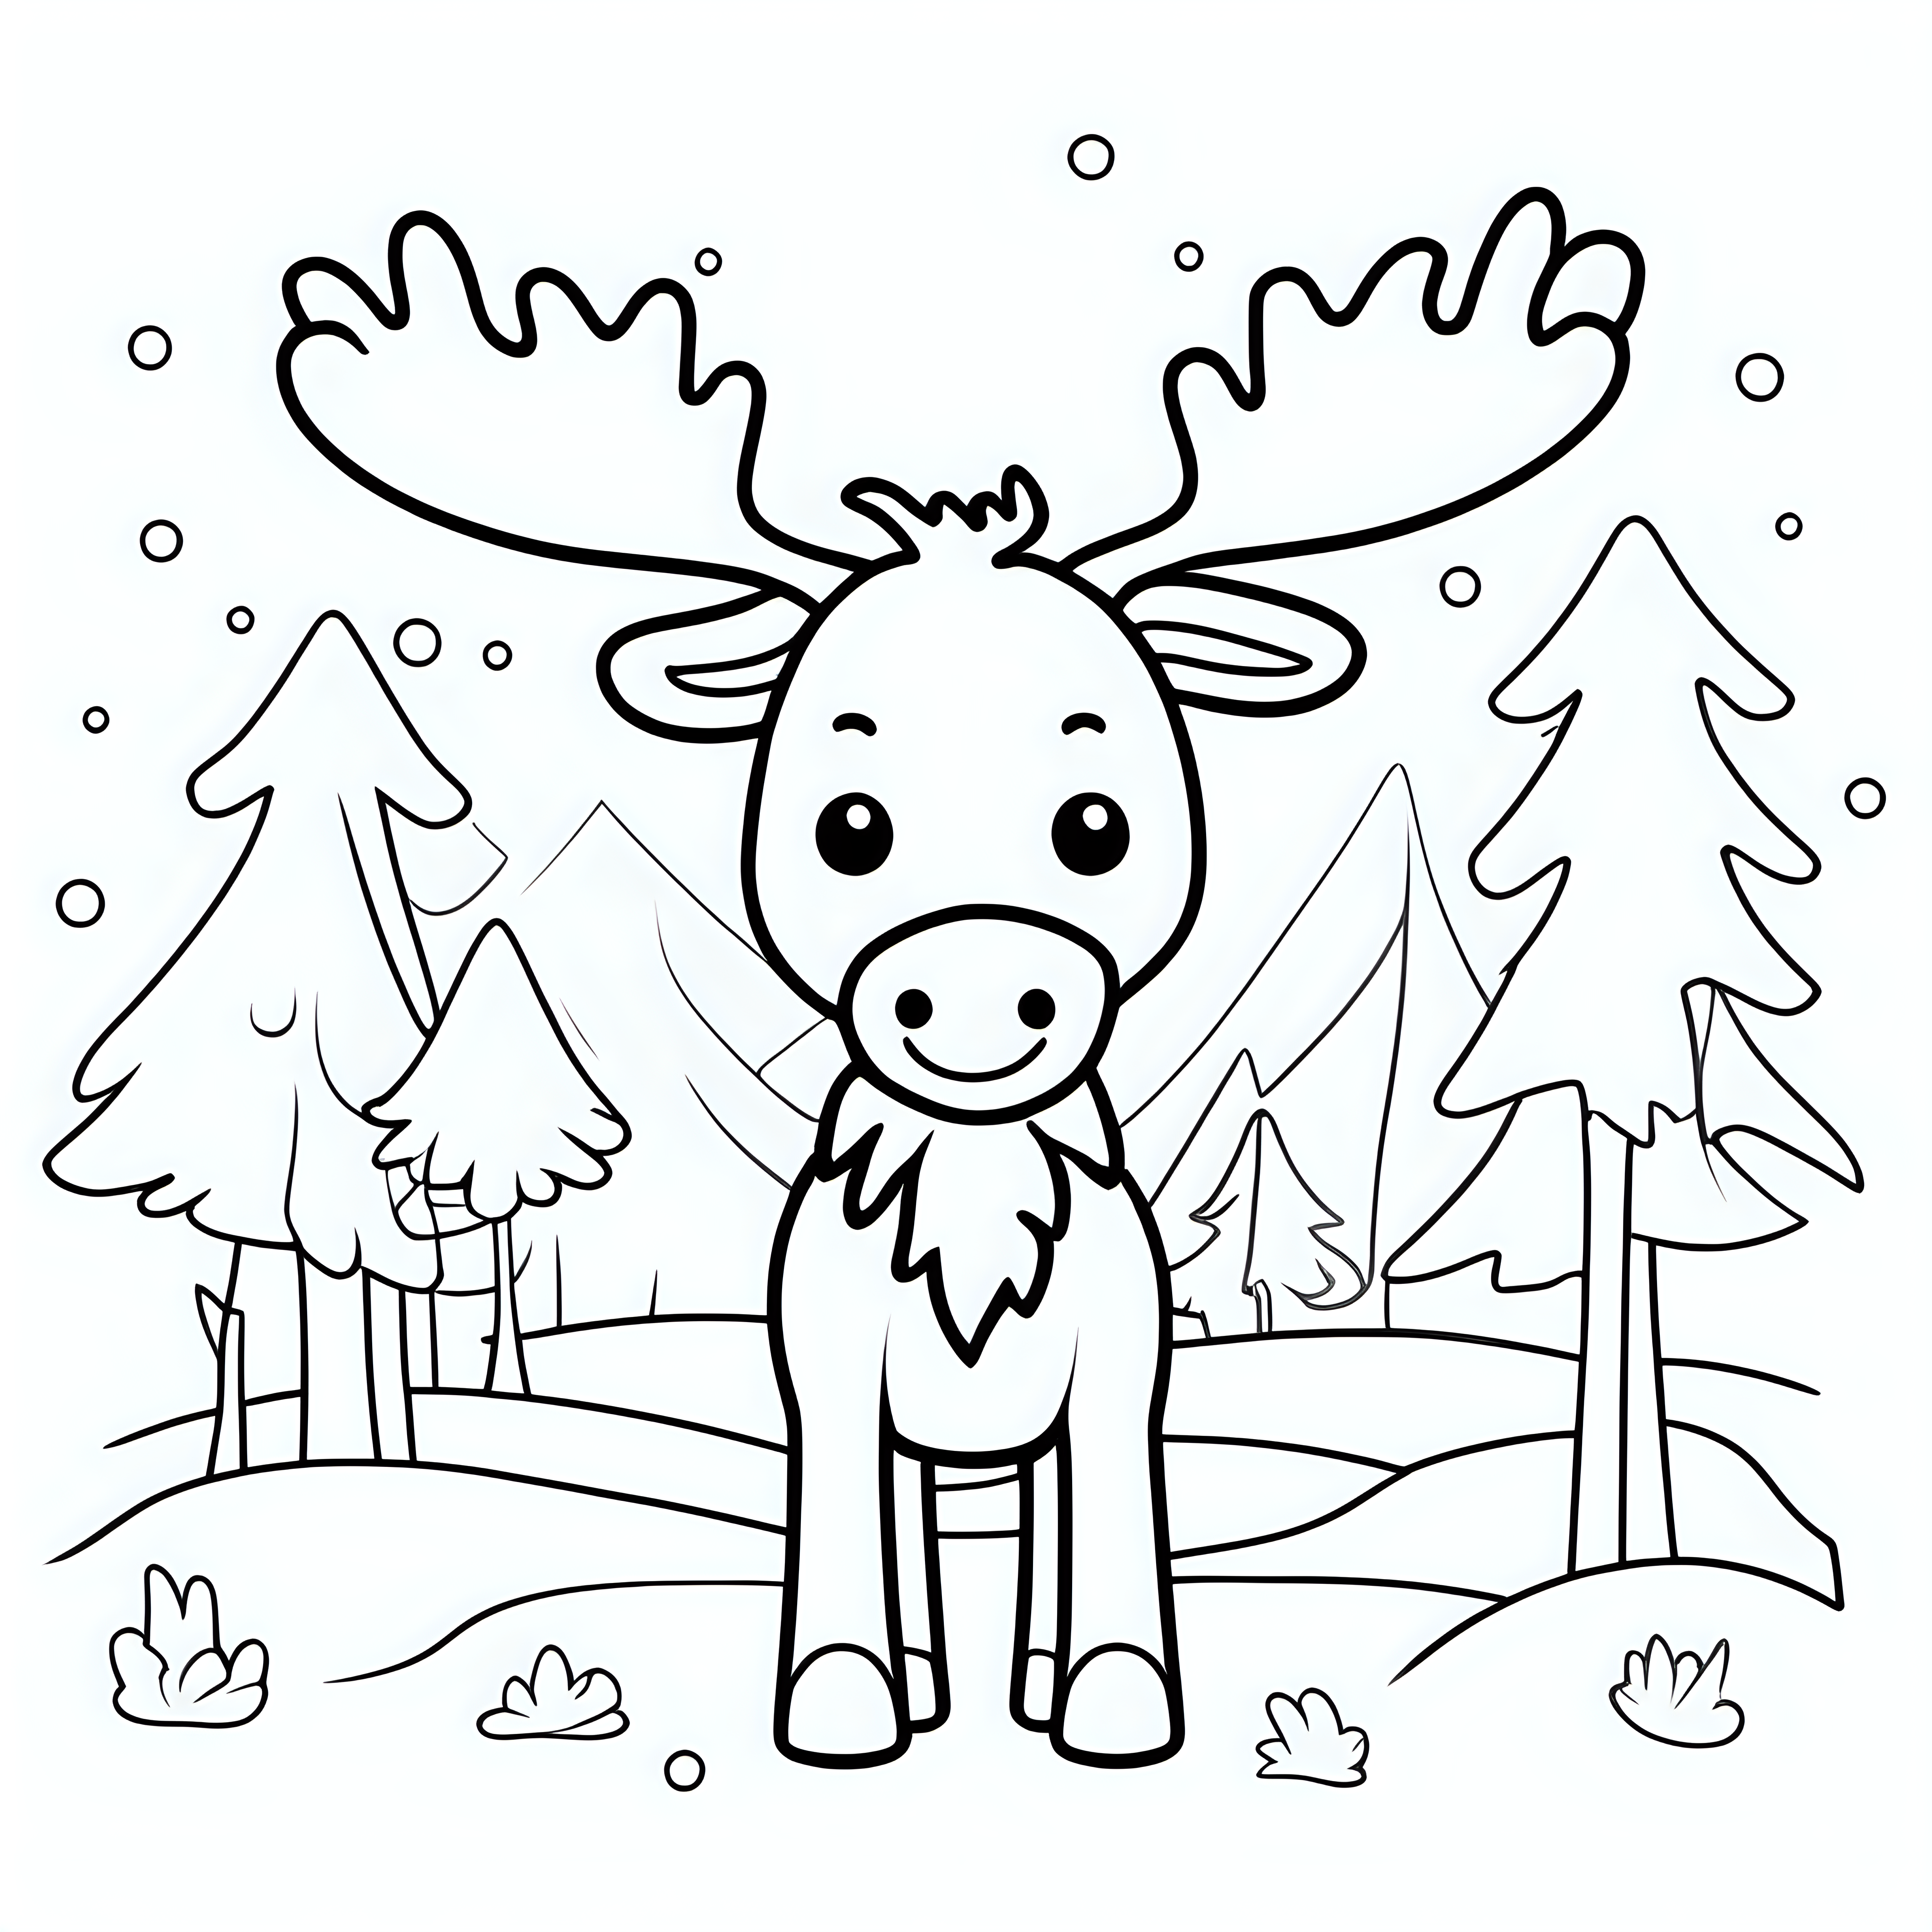 draw a cute Moose with only the outline in black for a coloring book for kids